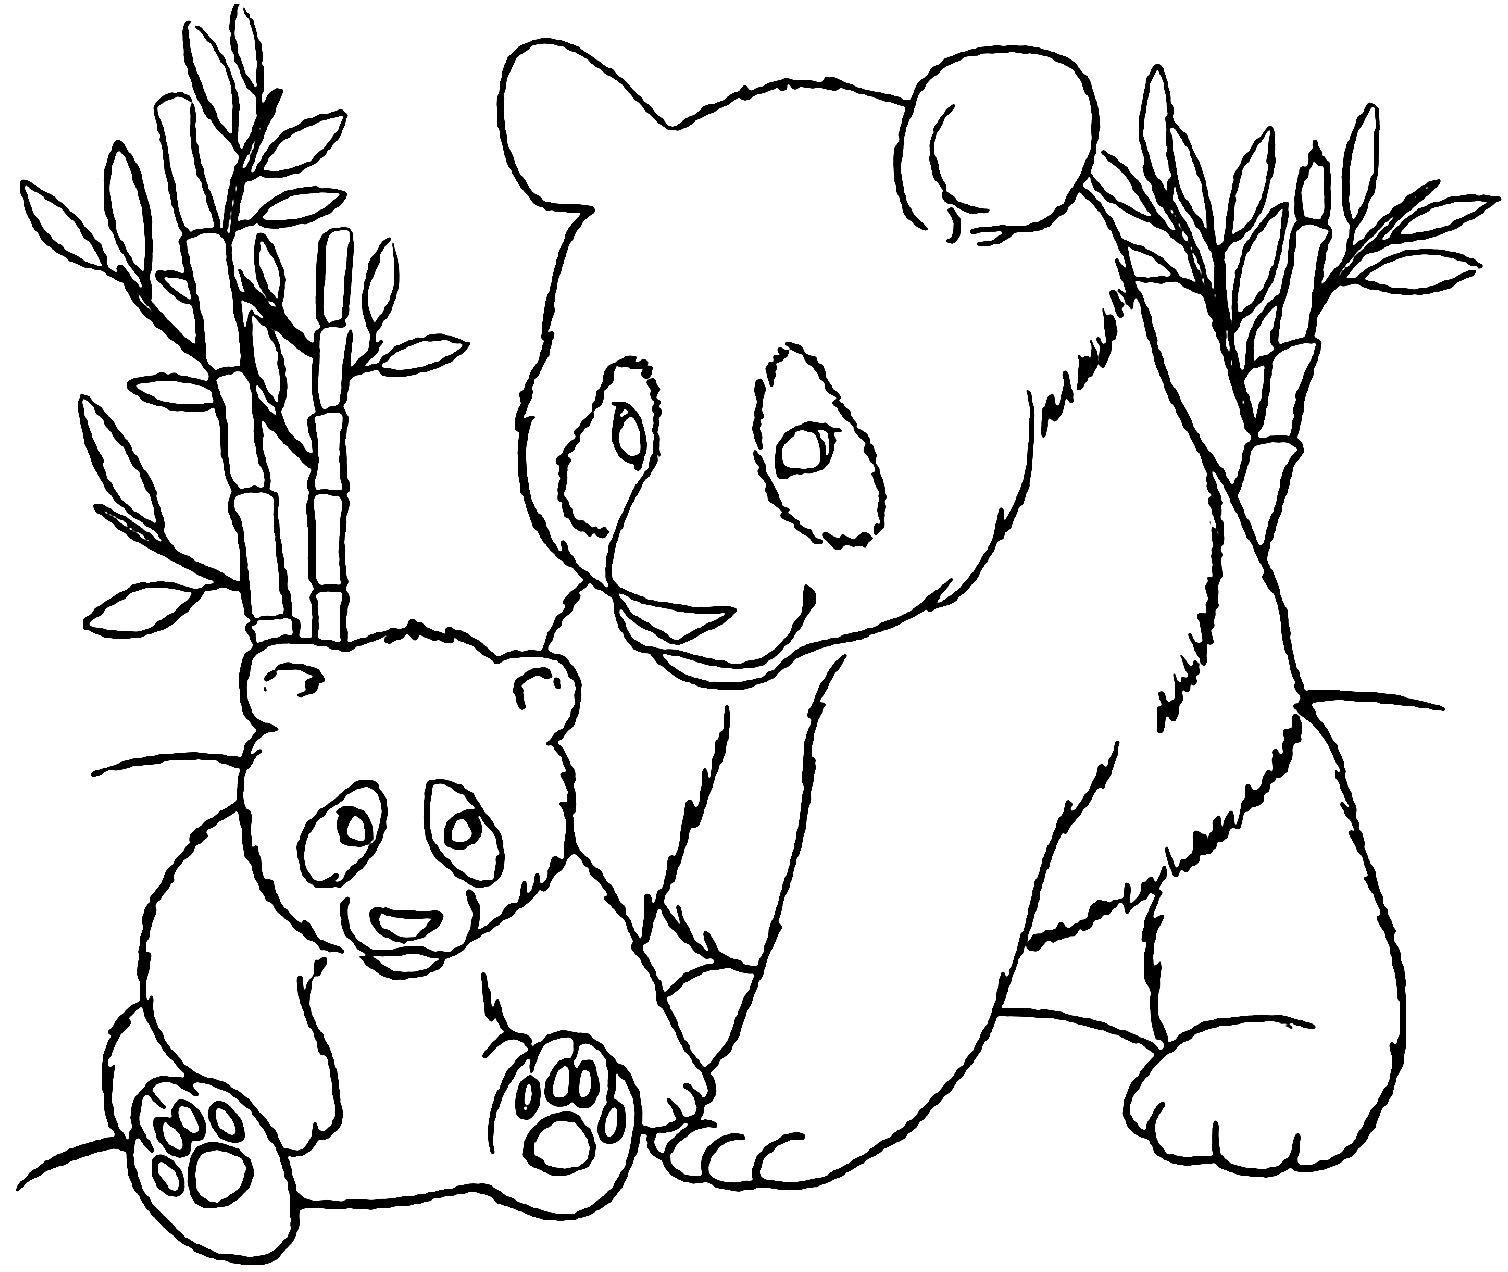 Printable panda coloring pages for kids - Pandas Kids Coloring Pages